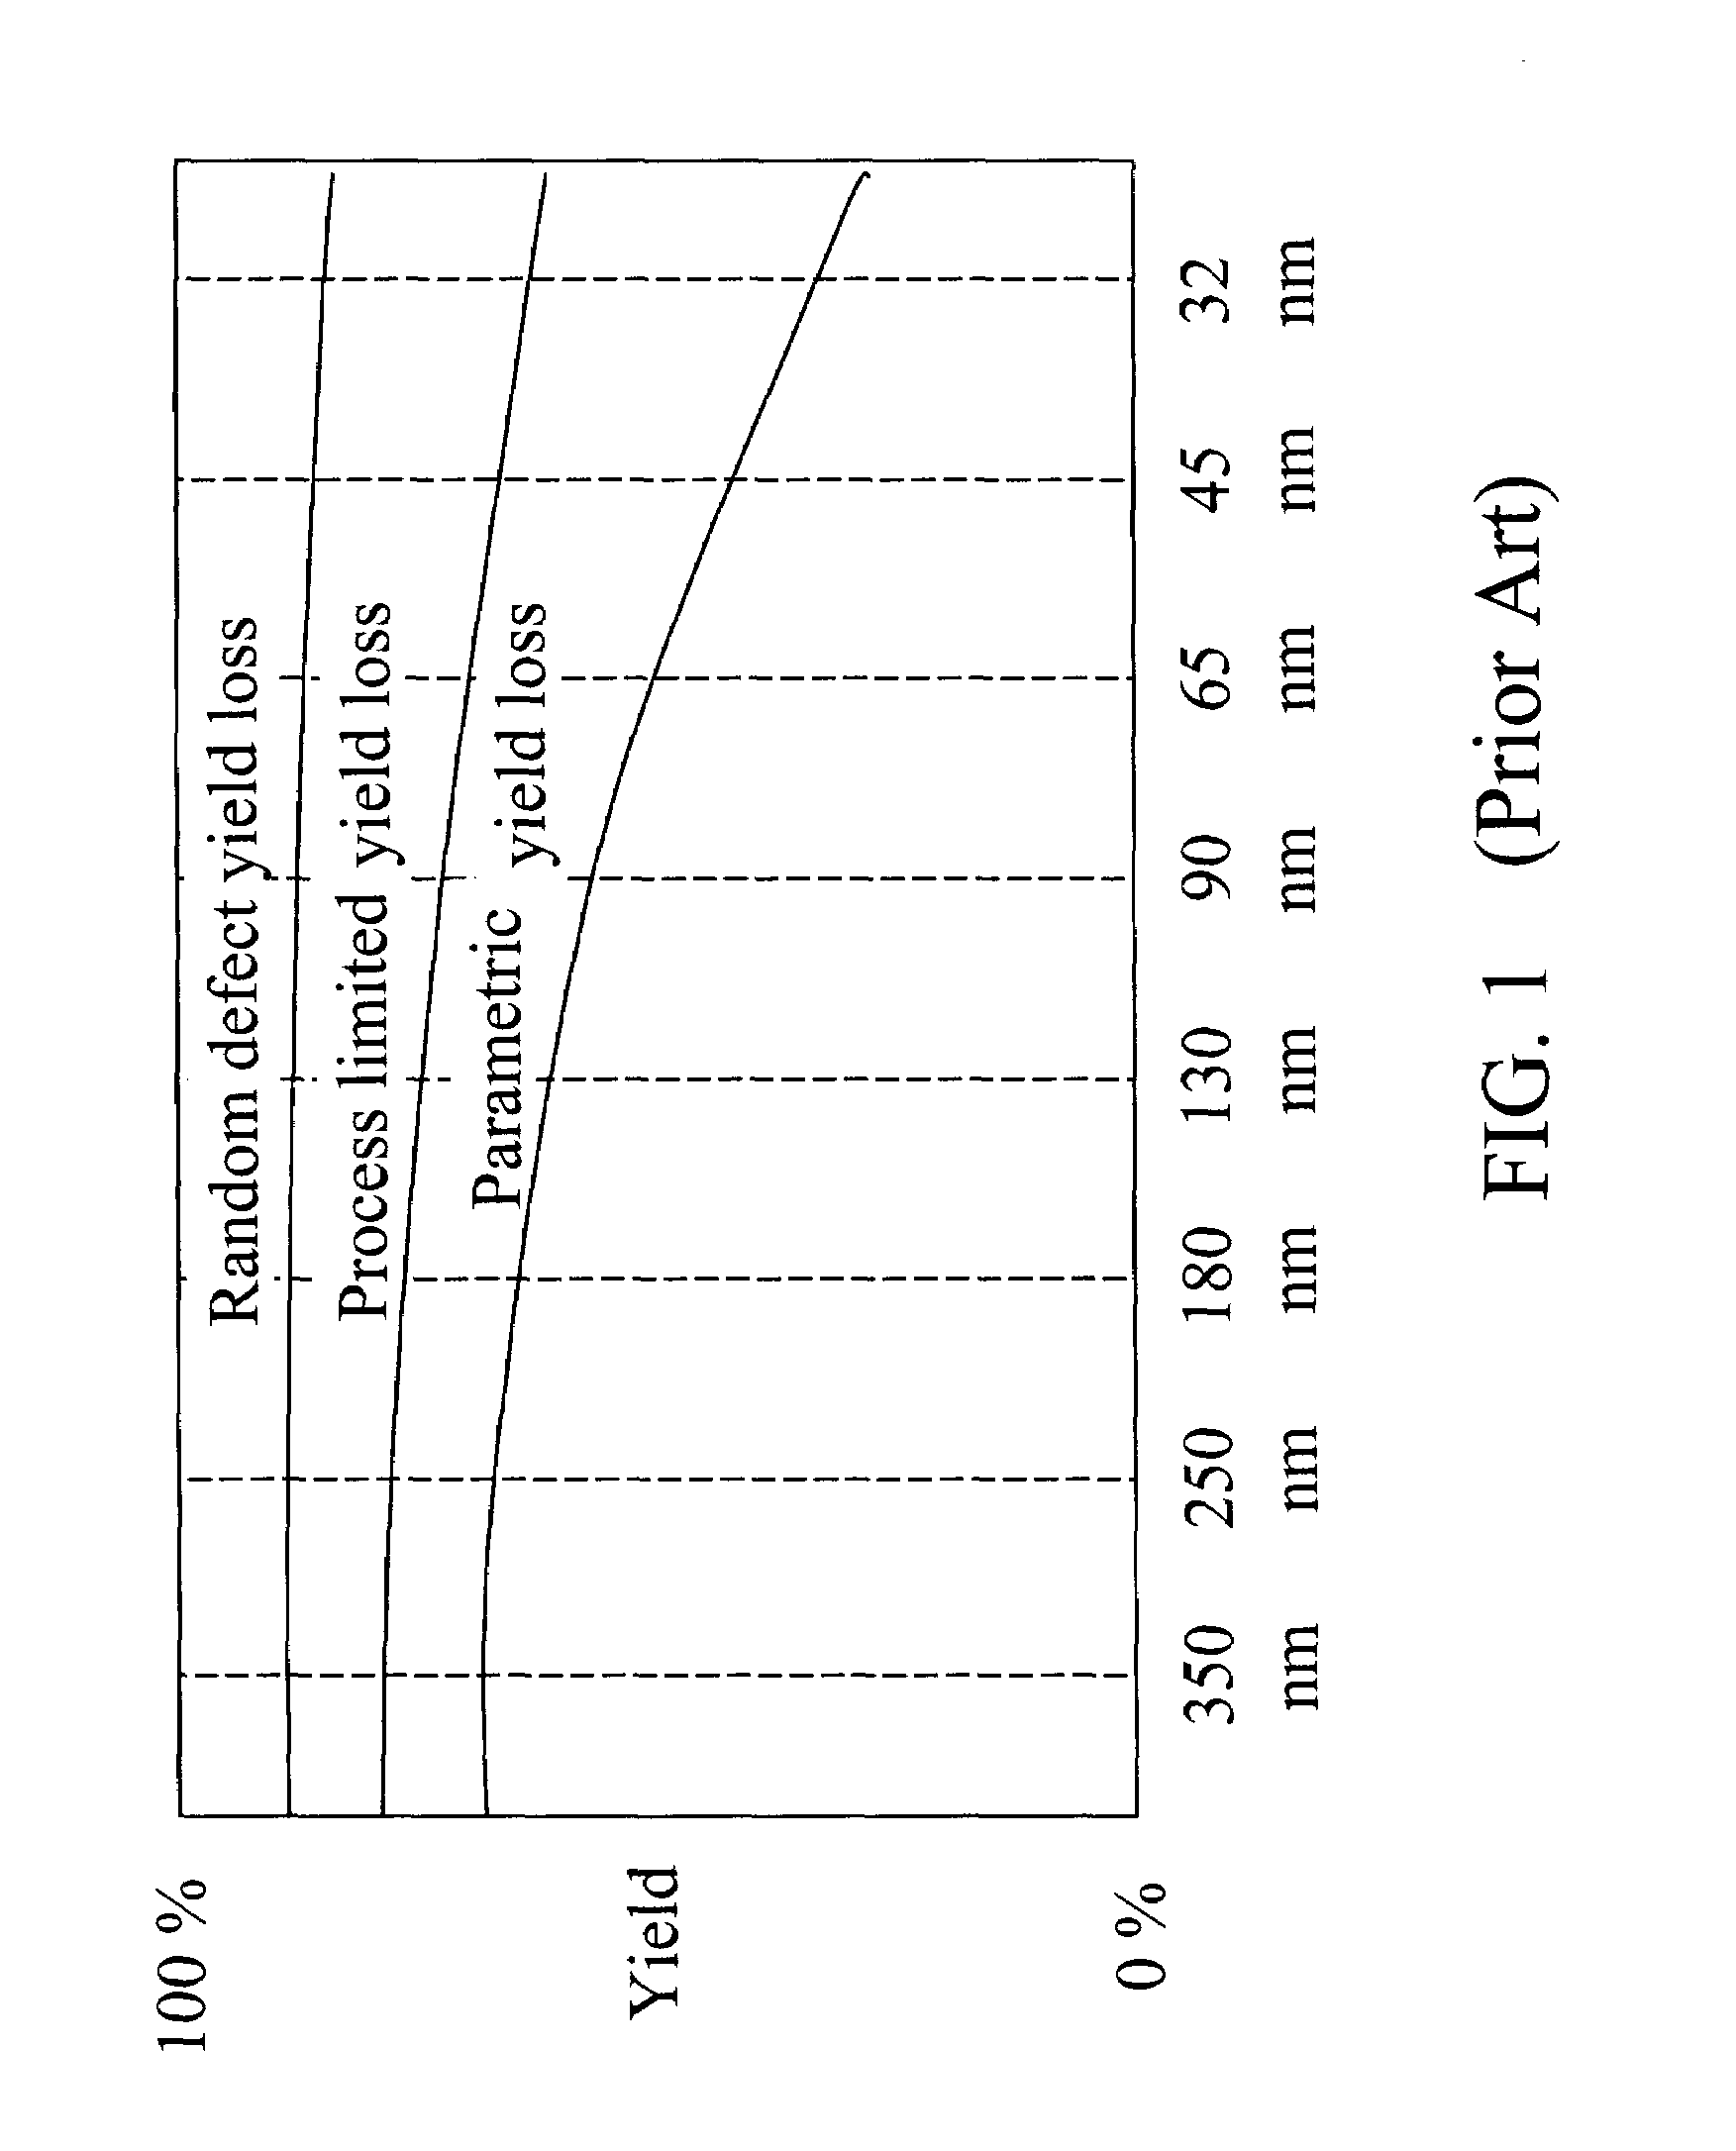 Methods and system for analysis and management of parametric yield